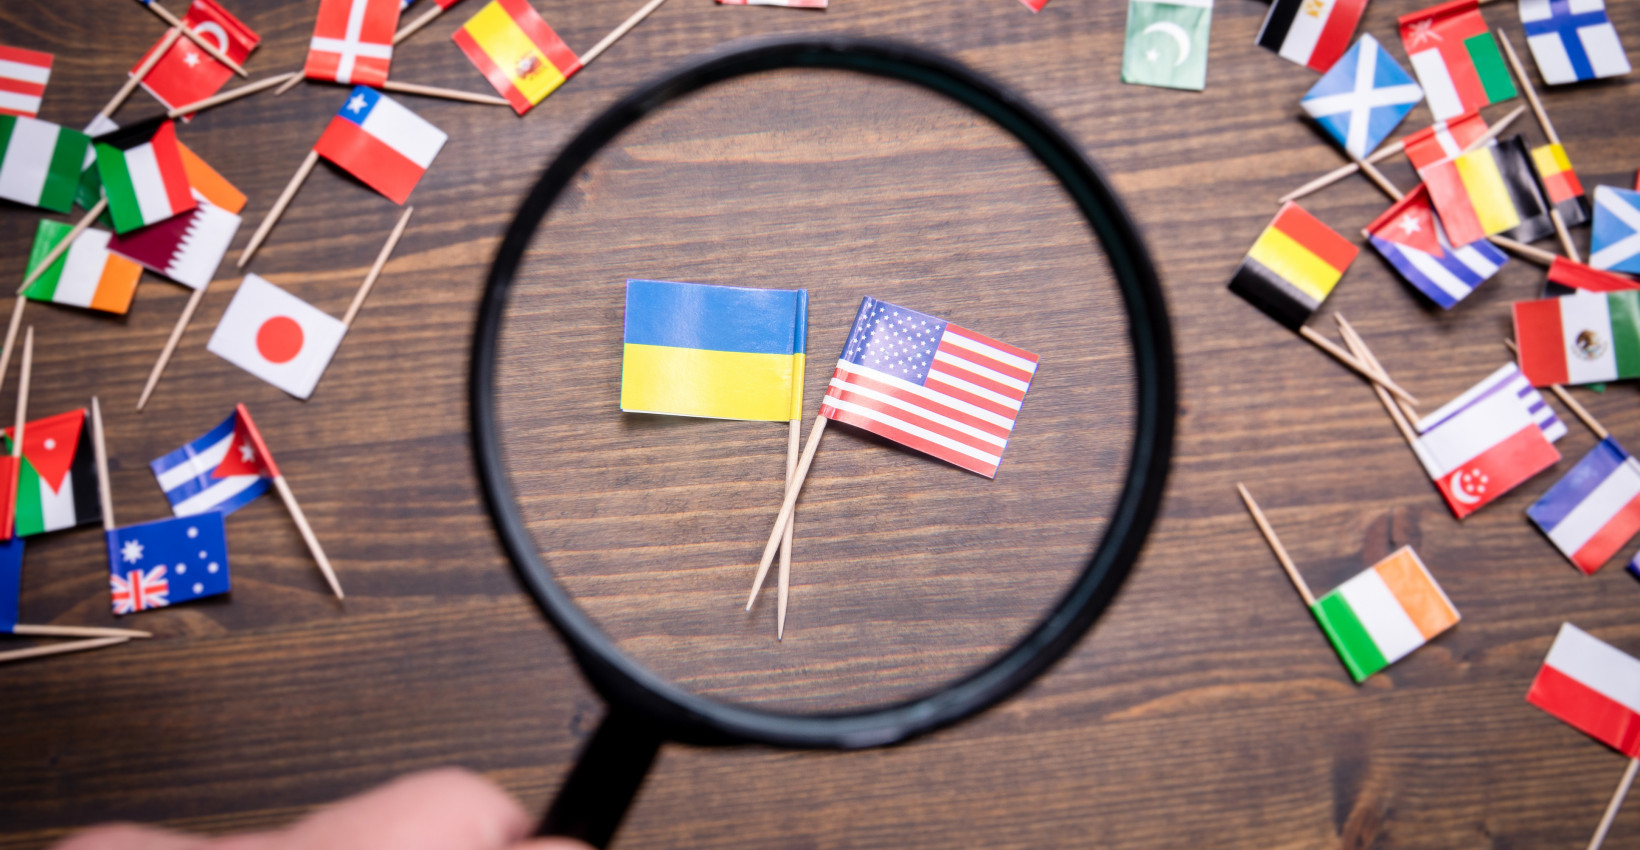 The Ukraine and American flag under a magnifying glass